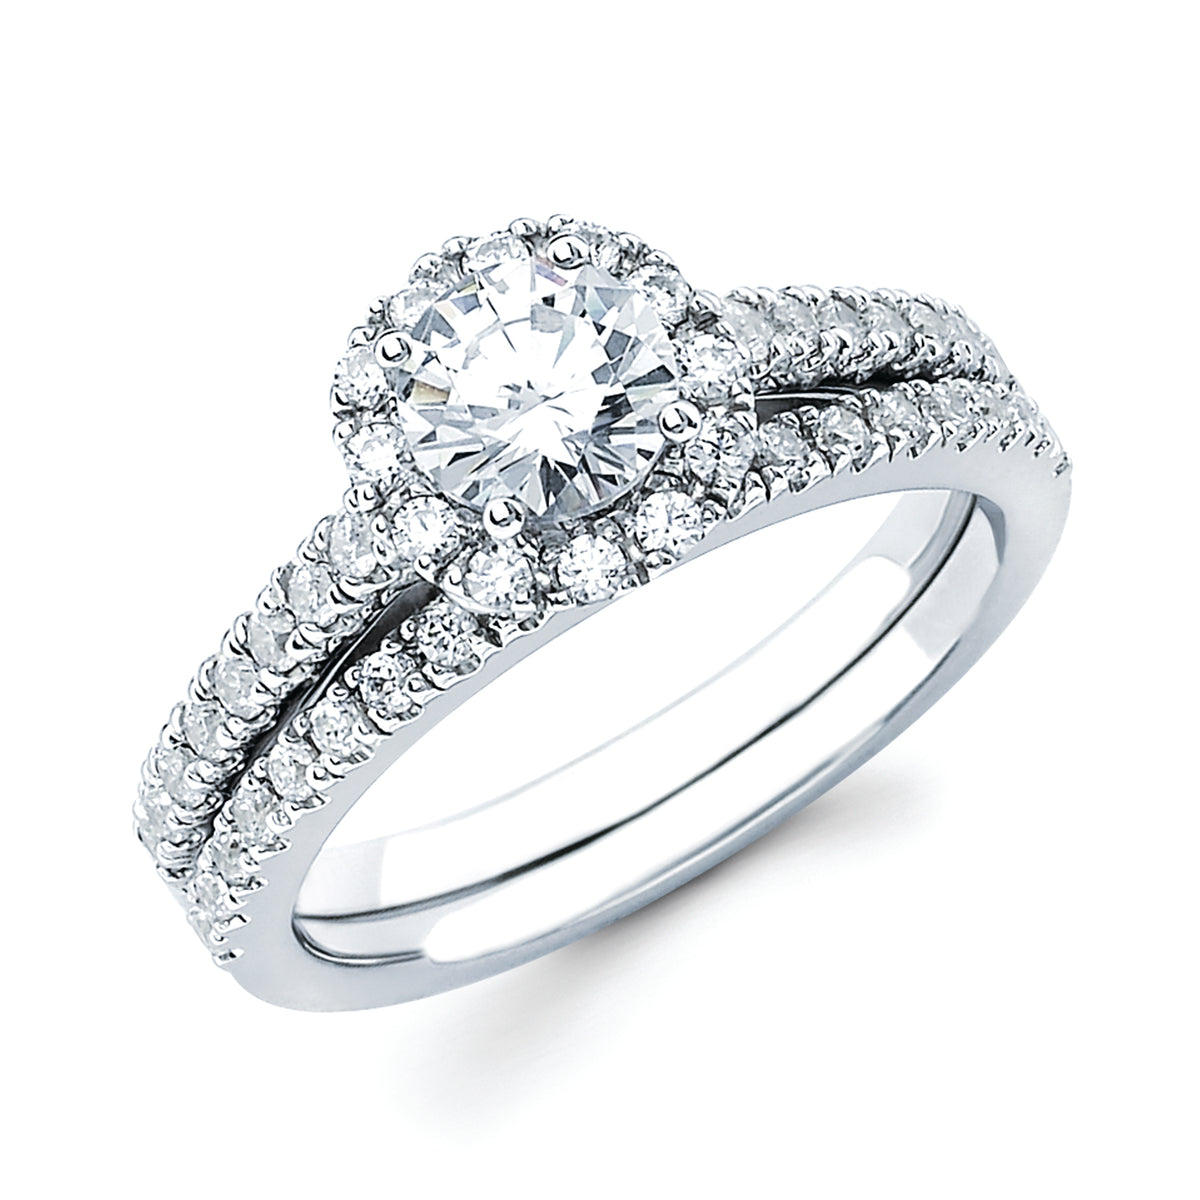 Halo Bridal: 3/8 Ctw. Diamond Halo Semi Mount available for 3/4 Ct. Round Center Diamond in 14K Gold